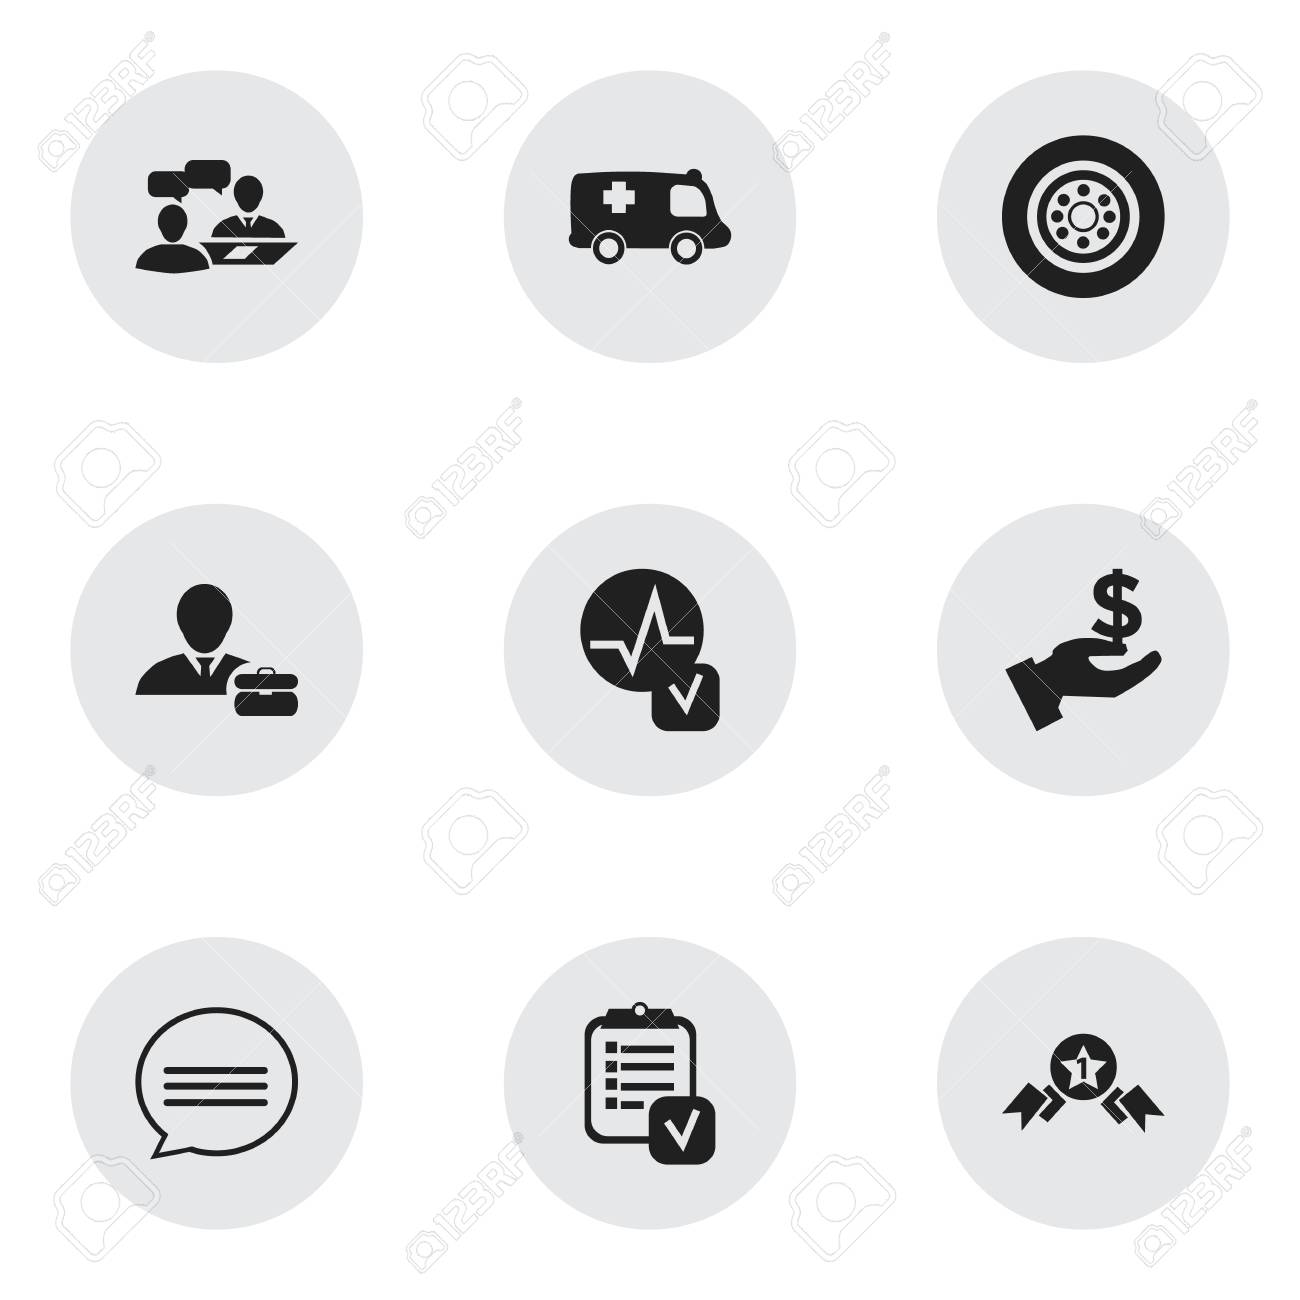 Set 20 Editable Complicated Icons Includes Stock Vector 700160893 